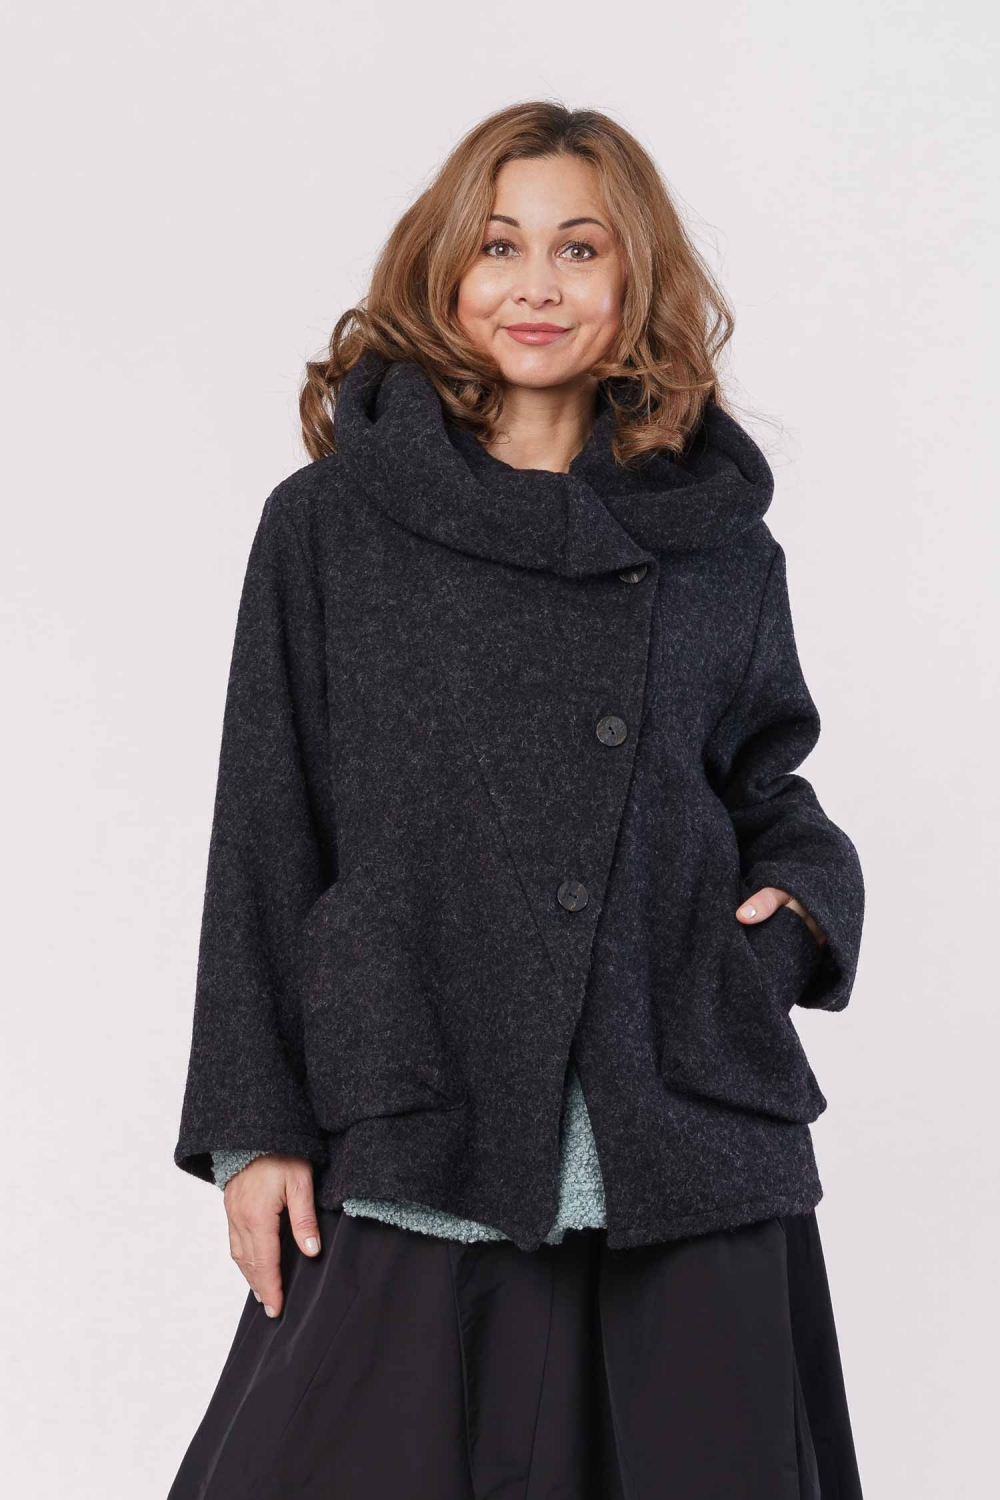 Kosmo Jacke in A-Form aus 100% Wolle